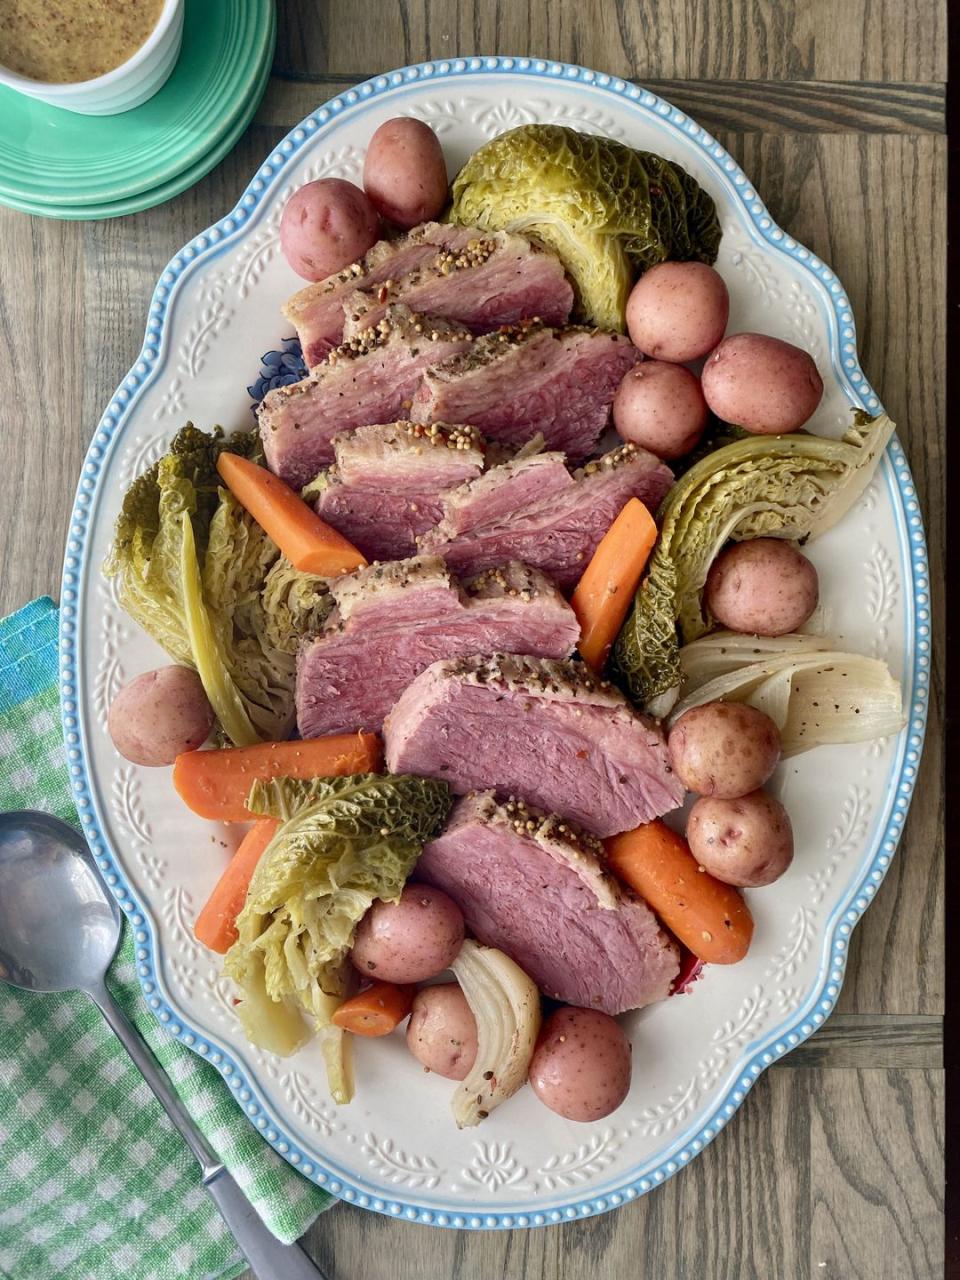 st patricks day traditions corned beef and cabbage